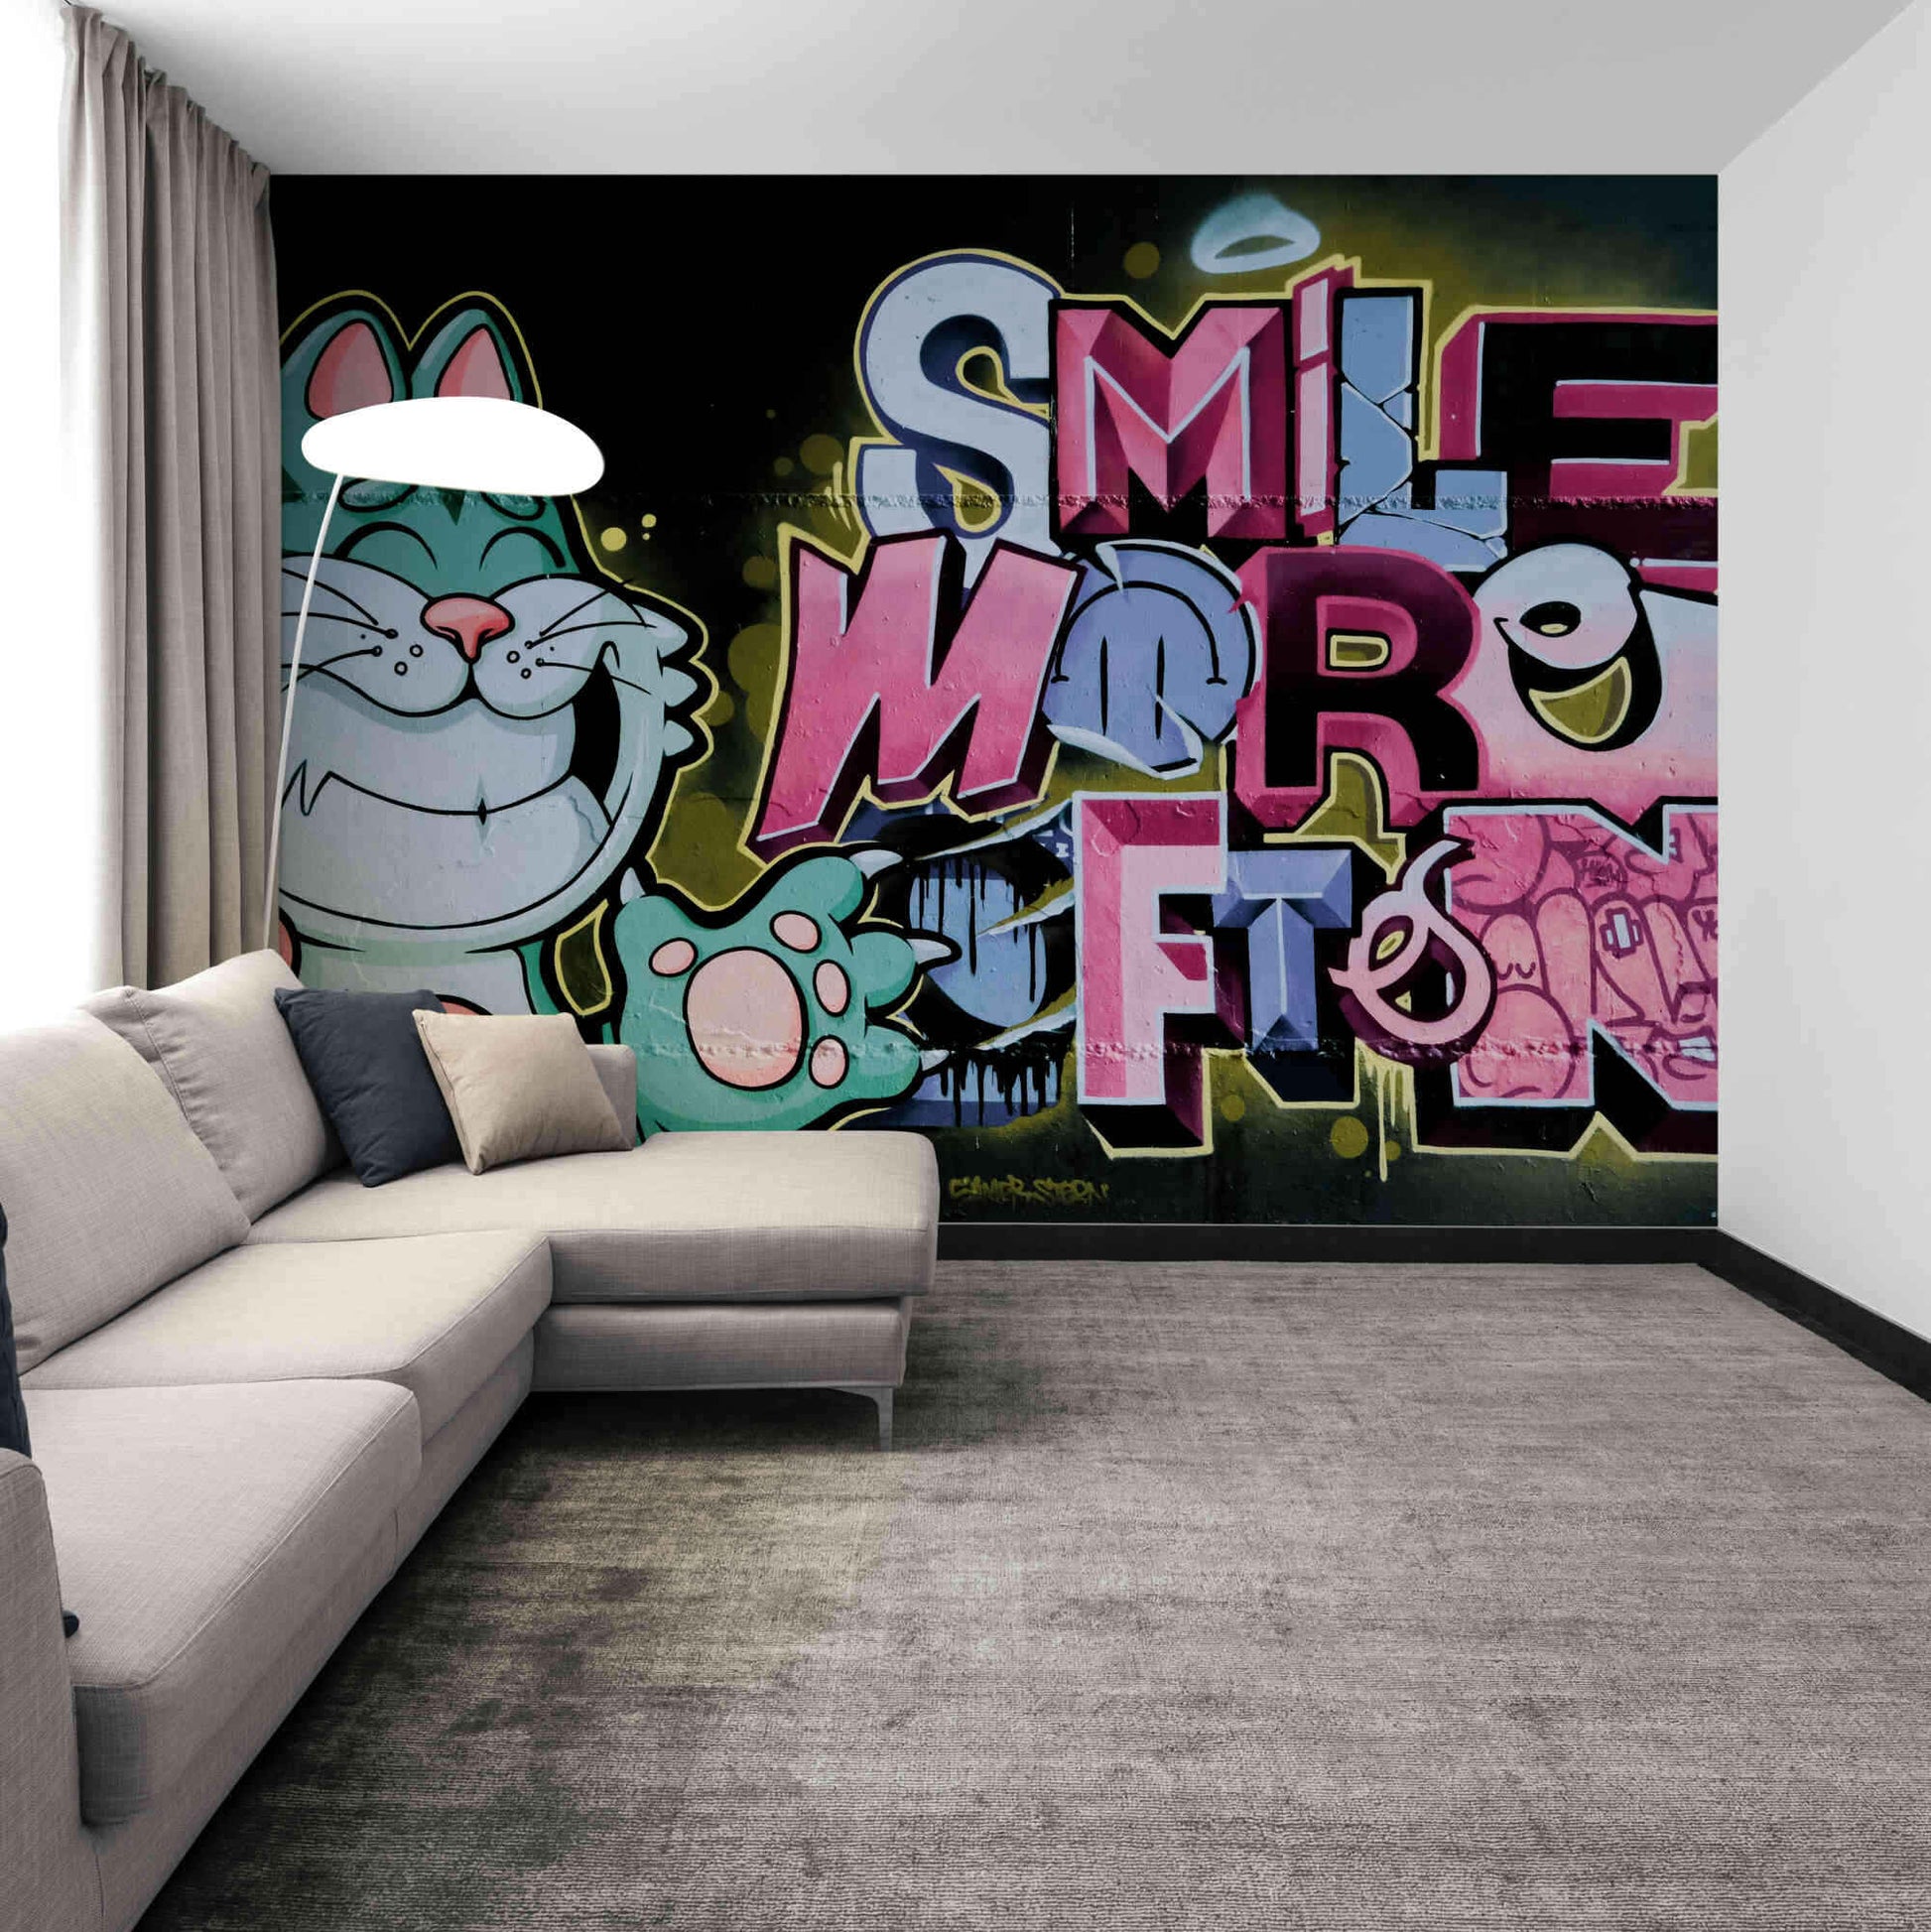 Cute animal friends in colorful graffiti cartoon wallpaper for a cheerful bedroom atmosphere.